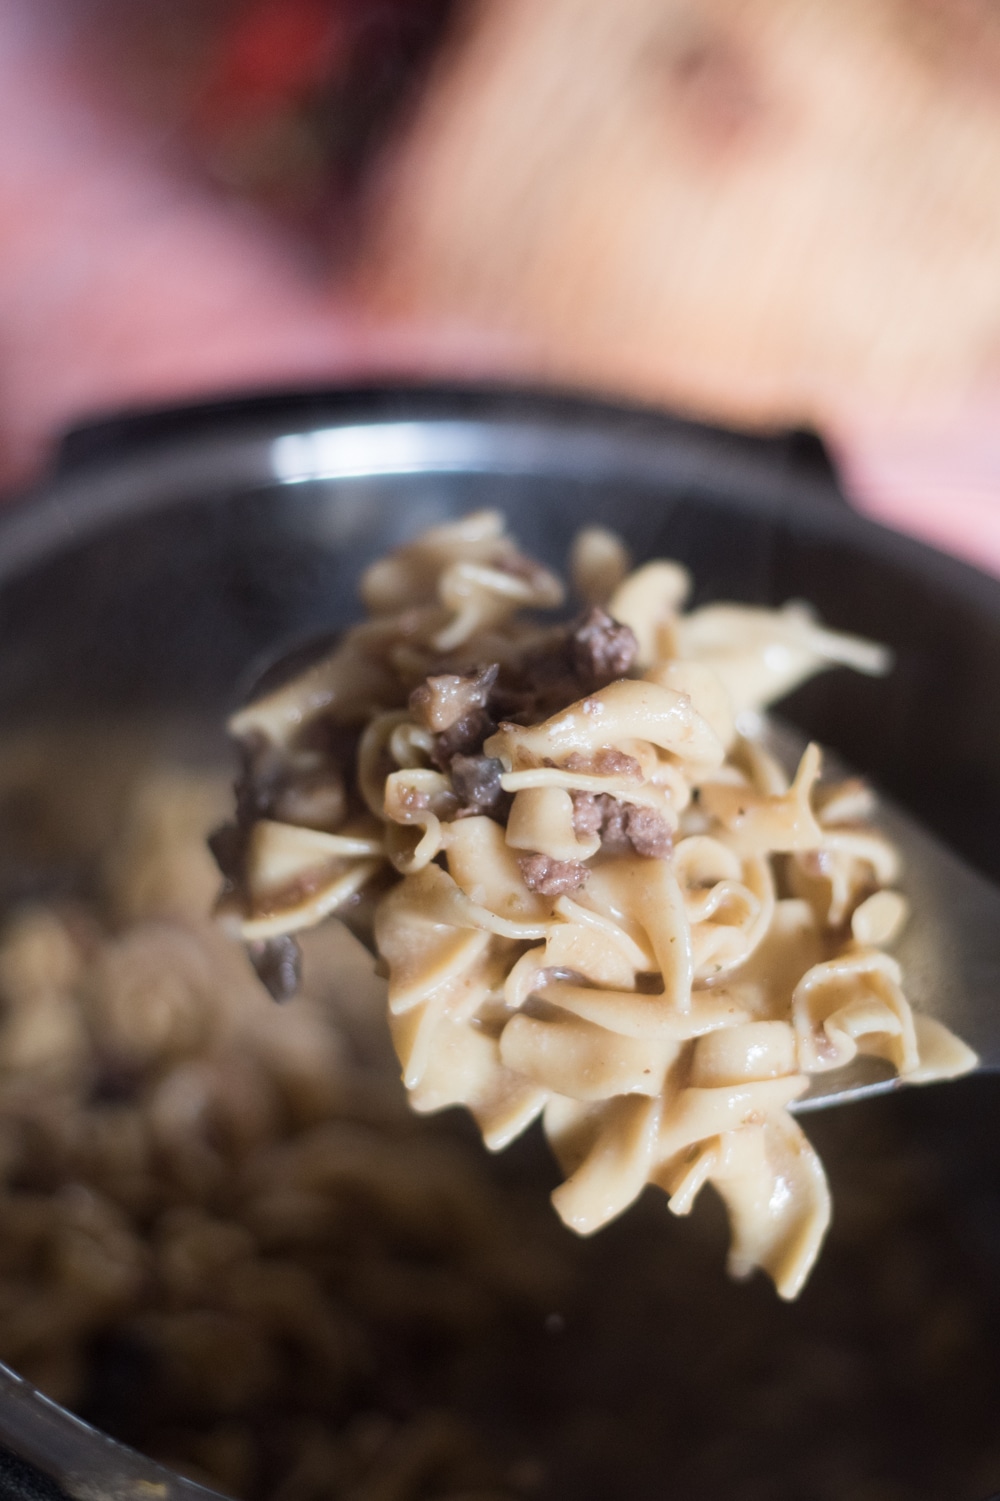 A close up of food, with Beef Stroganoff and Pasta